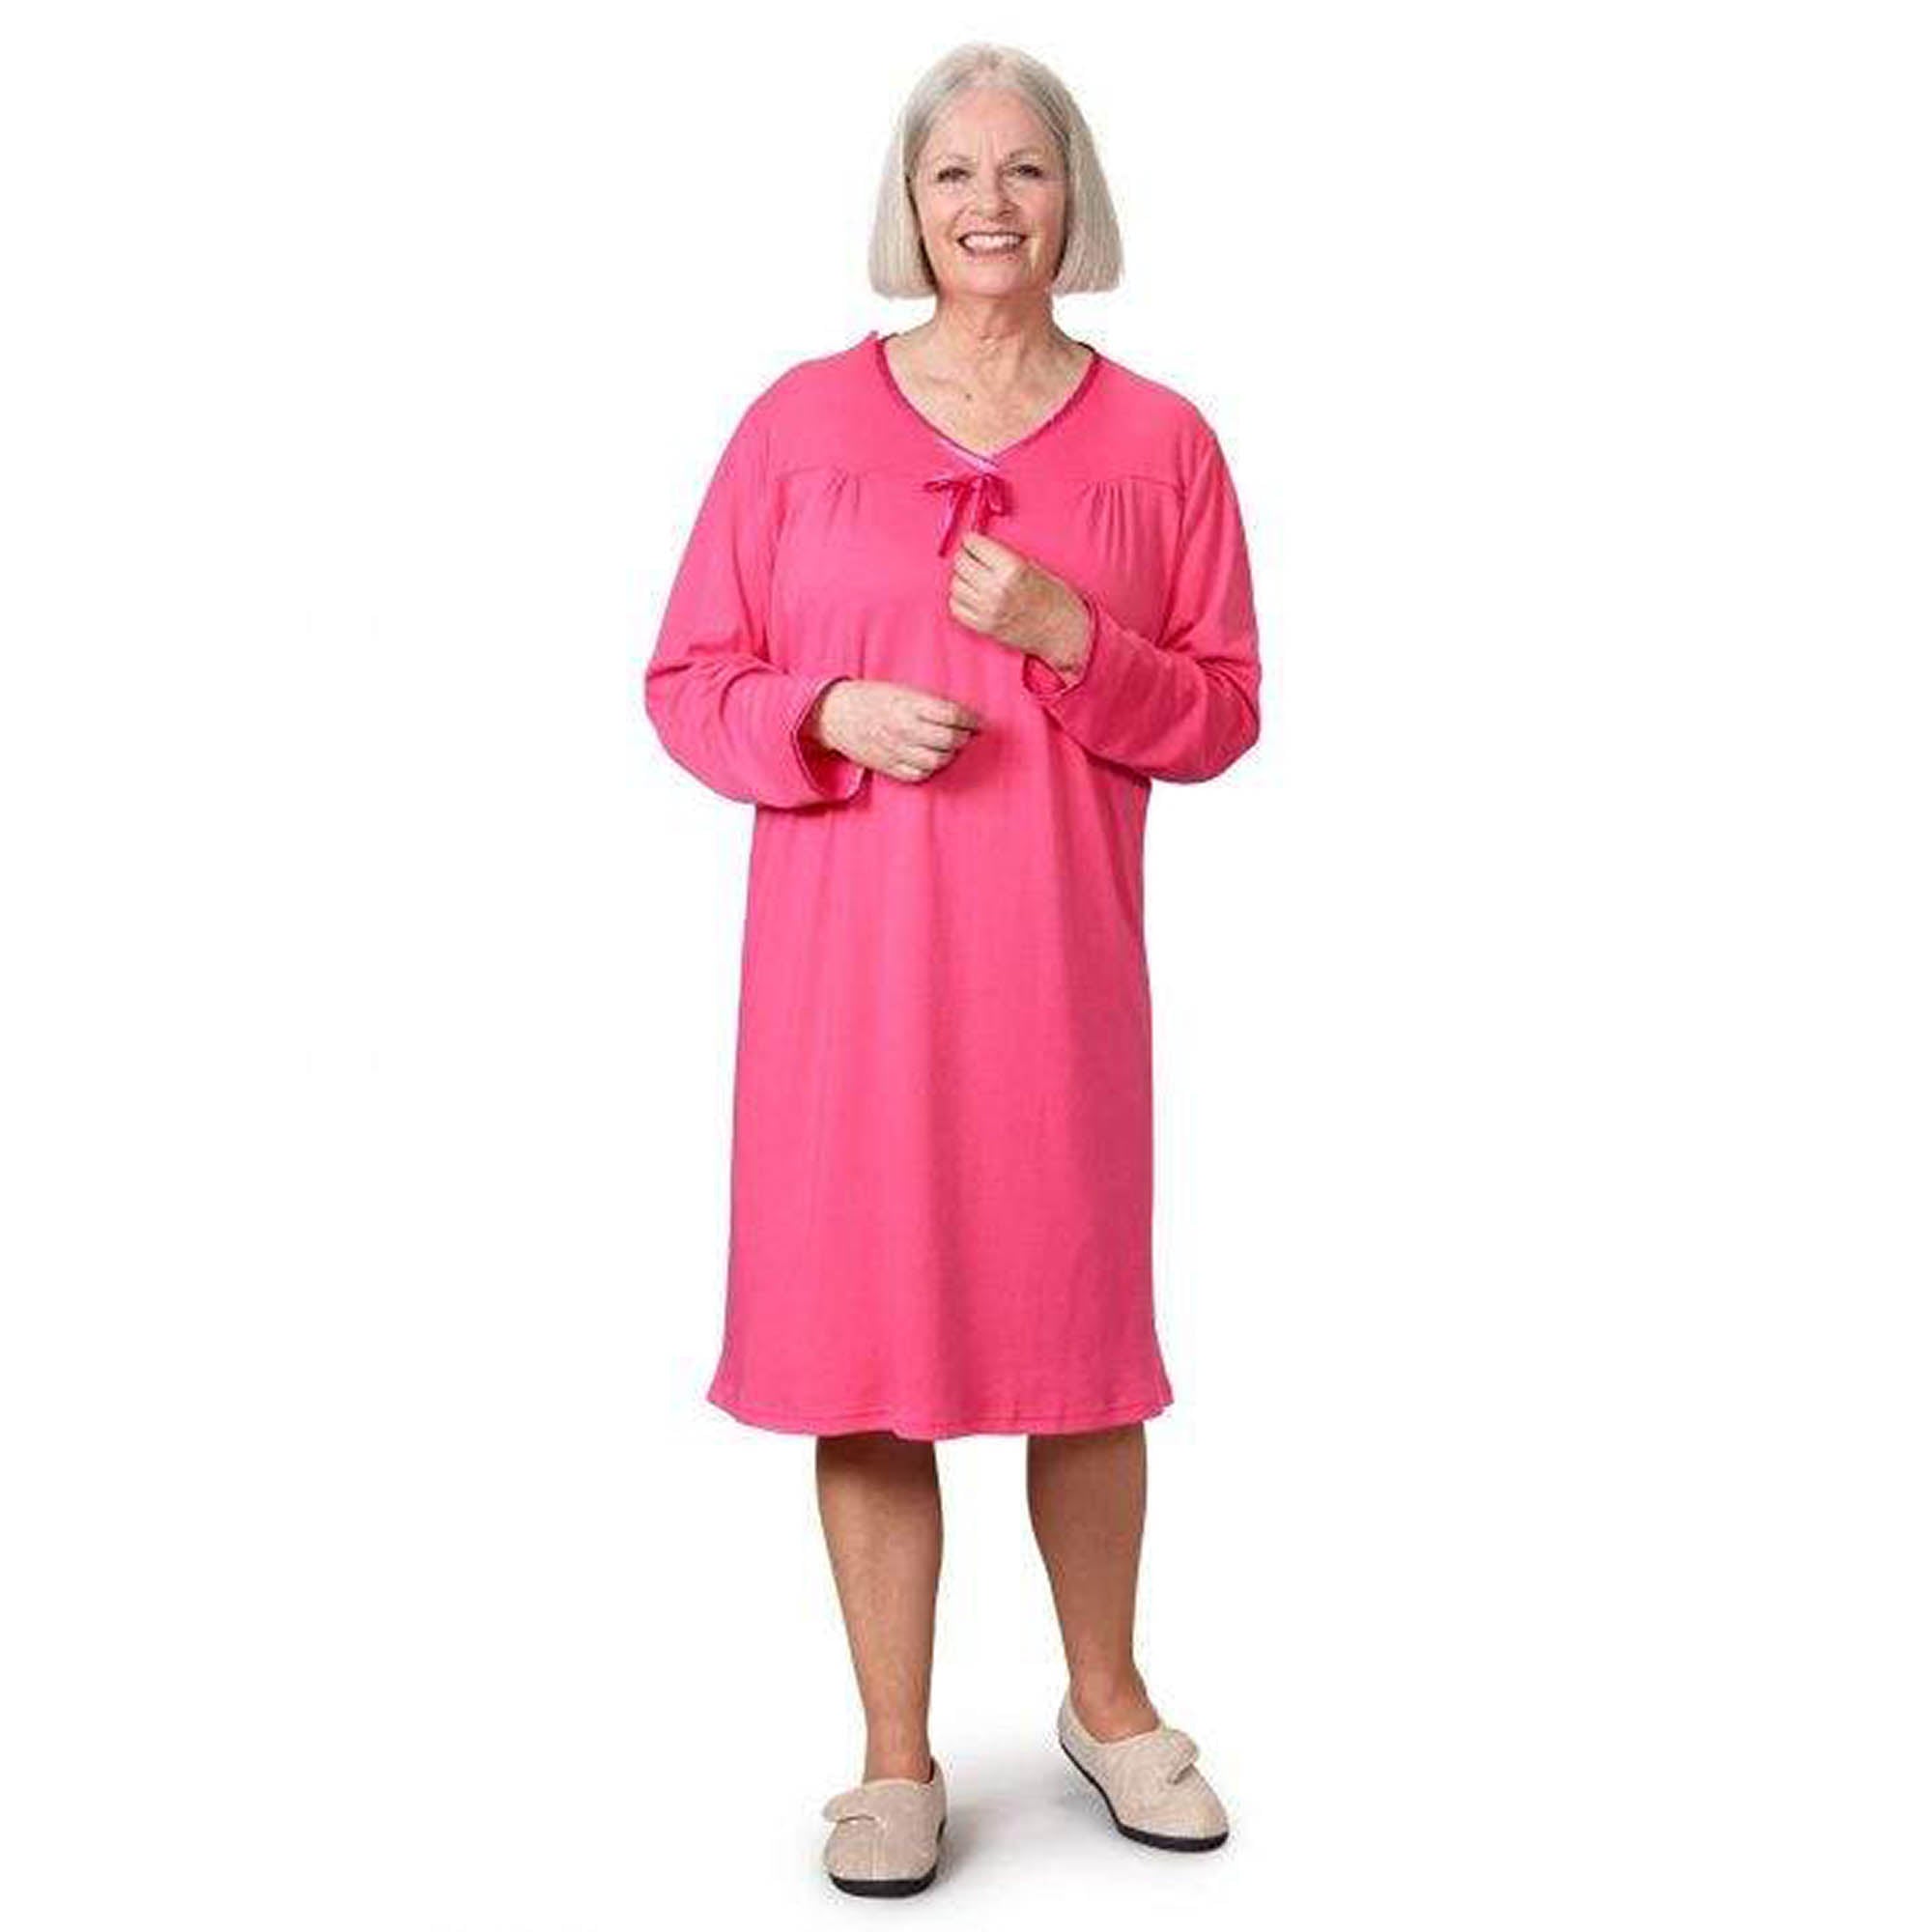 Silverts Women's Open Back Antimicrobial Long-sleeve Nightgown - Adaptive Clothing - Pink - XL